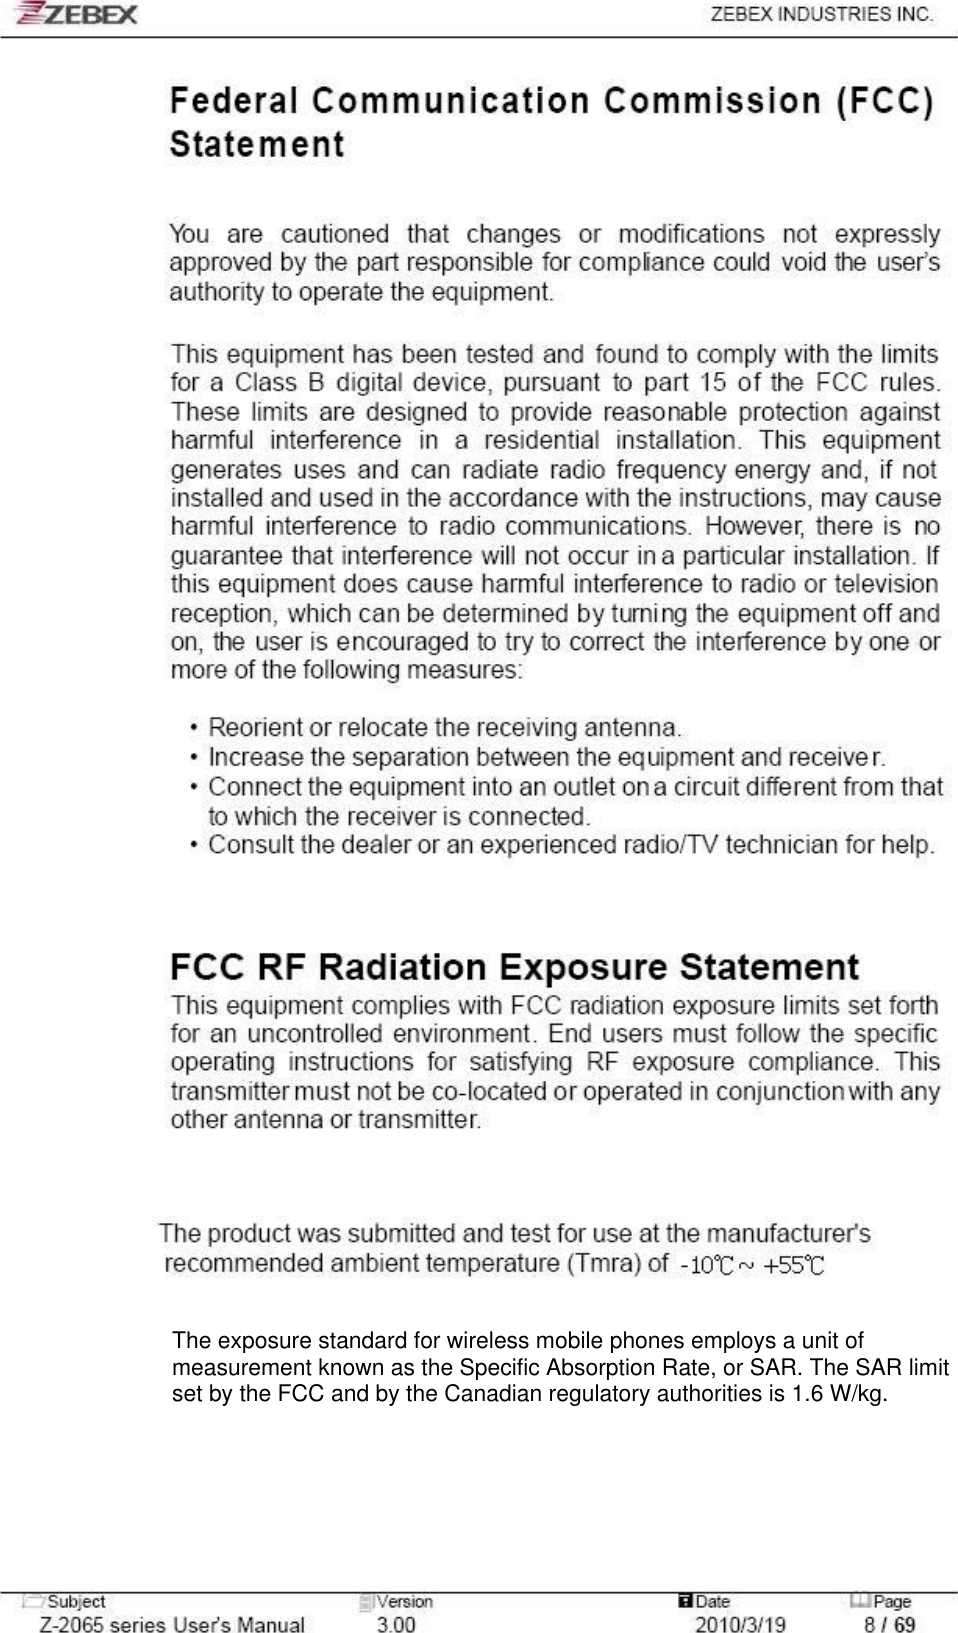 The exposure standard for wireless mobile phones employs a unit ofmeasurement known as the Specific Absorption Rate, or SAR. The SAR limit set by the FCC and by the Canadian regulatory authorities is 1.6 W/kg. 